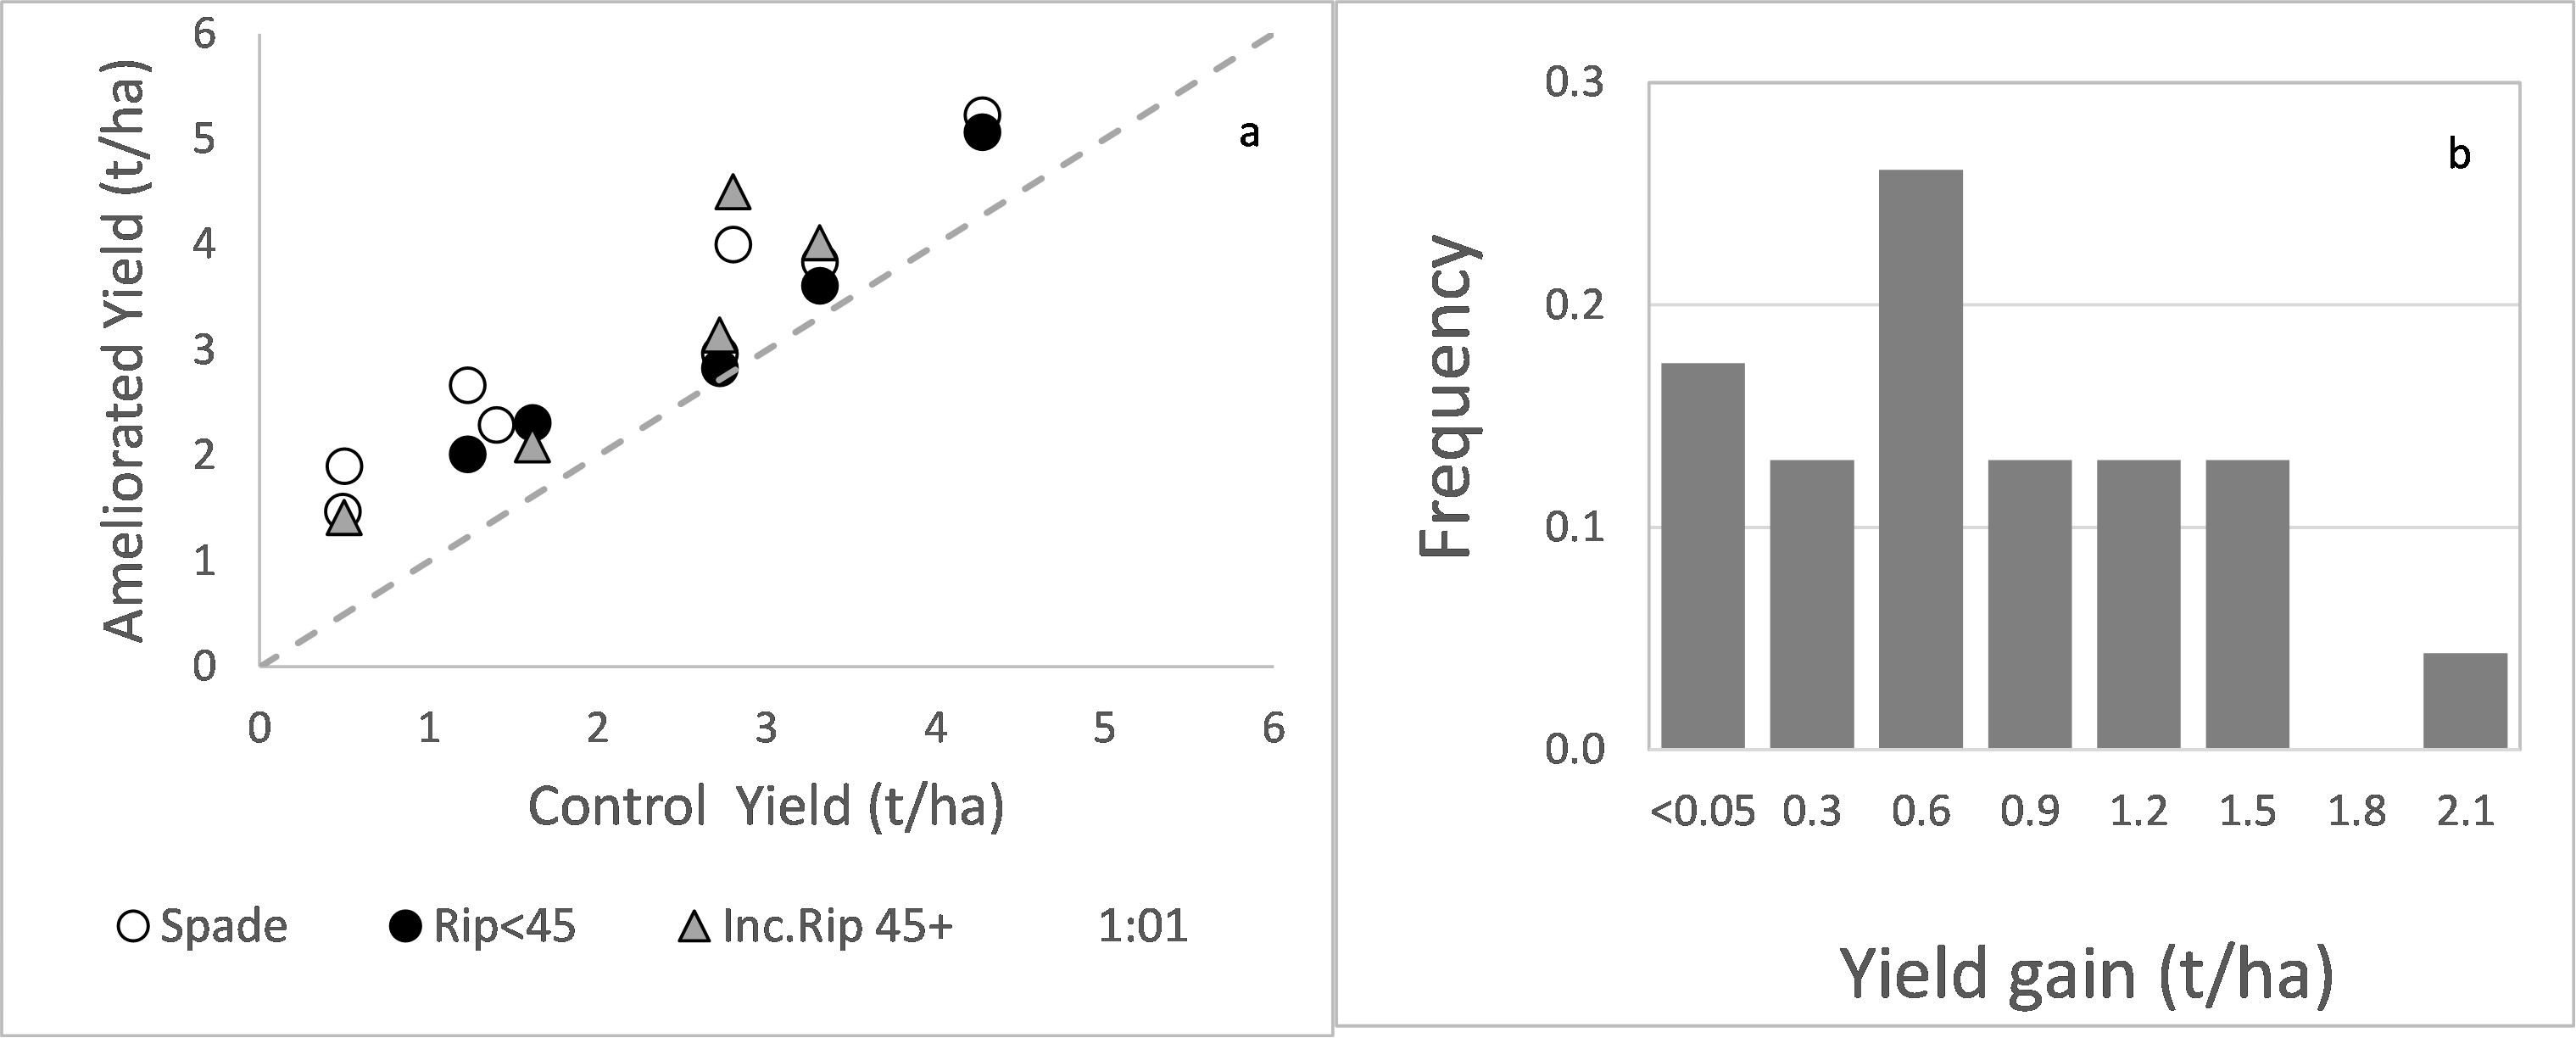 Figure 3.  Annual crop yield (t/ha) responses to spading, ripping (<45 cm) and inclusion ripping (>45 cm) in sands where repellency and physical issues combine presented as (a) biplot of unmodified control yields against deep ripped yields (t/ha) with the dotted line representing 1:1, and (b) frequency distributions of yield gains (ameliorated yield – control yield). The linear regression has a fit with R2 of 0.85 at P<0.001.